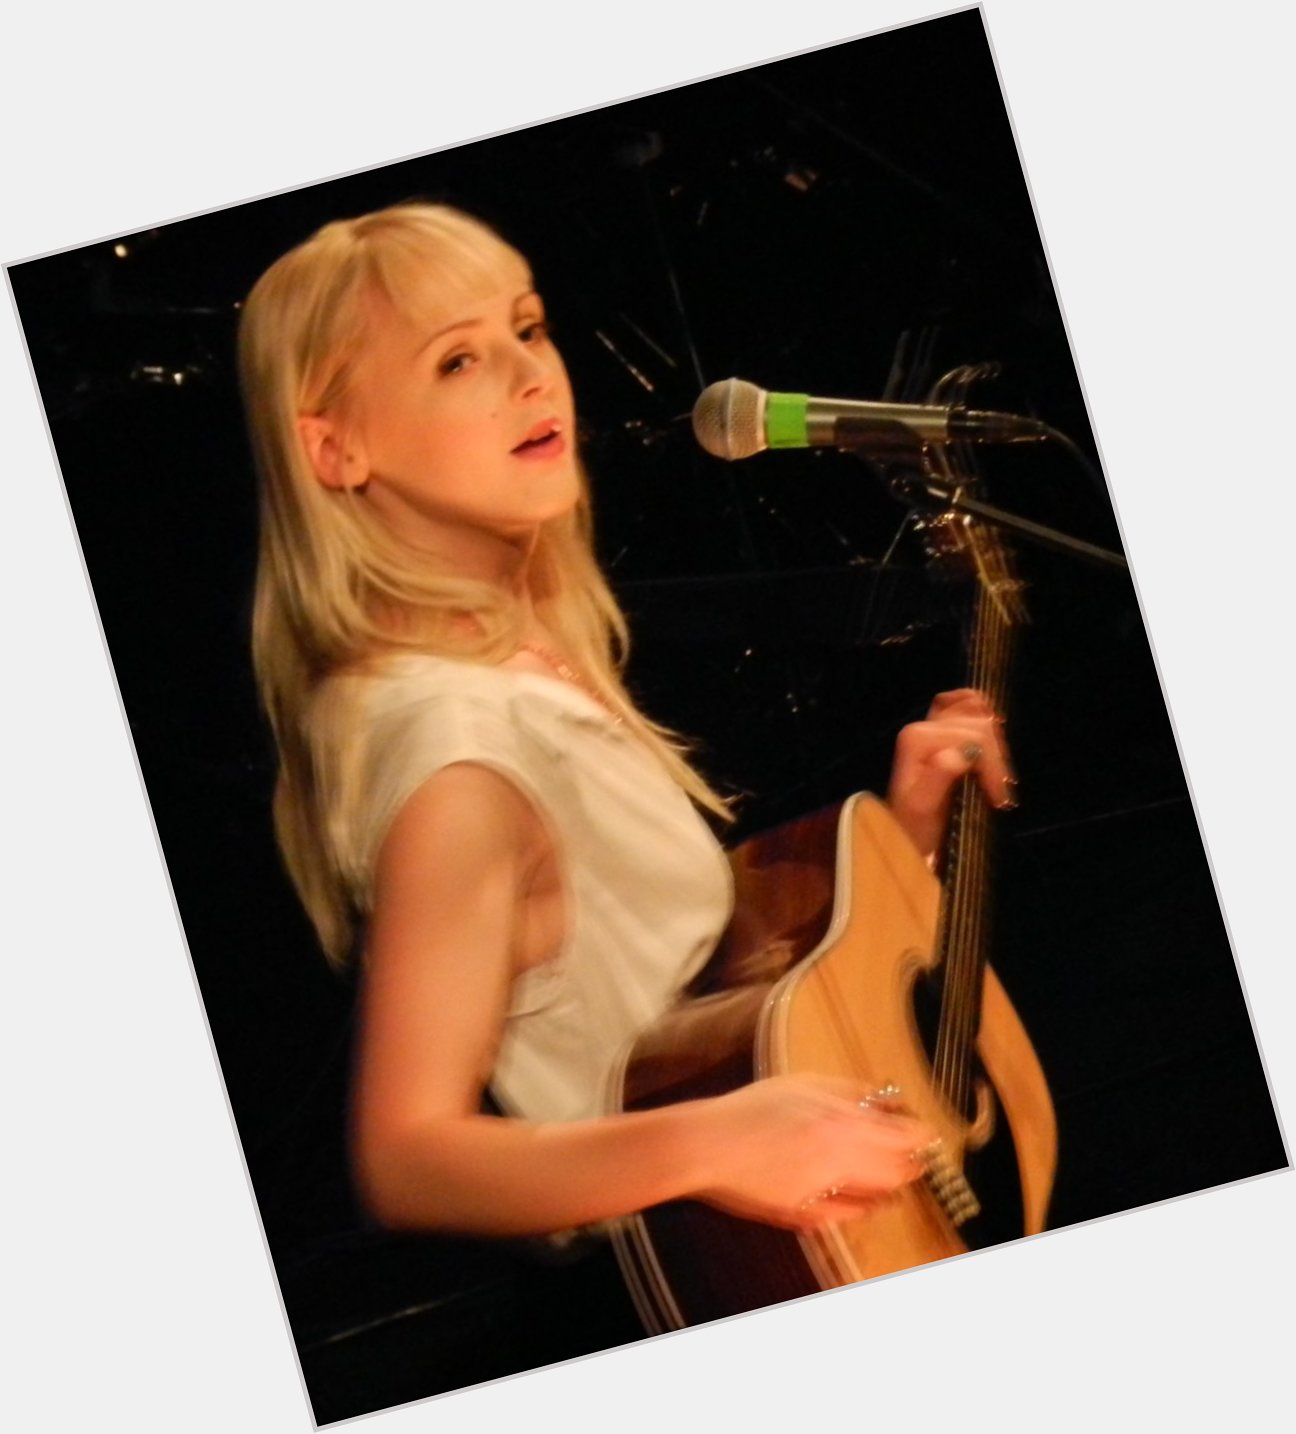 Please join me here at in wishing the one and only Laura Marling a very Happy Birthday today  